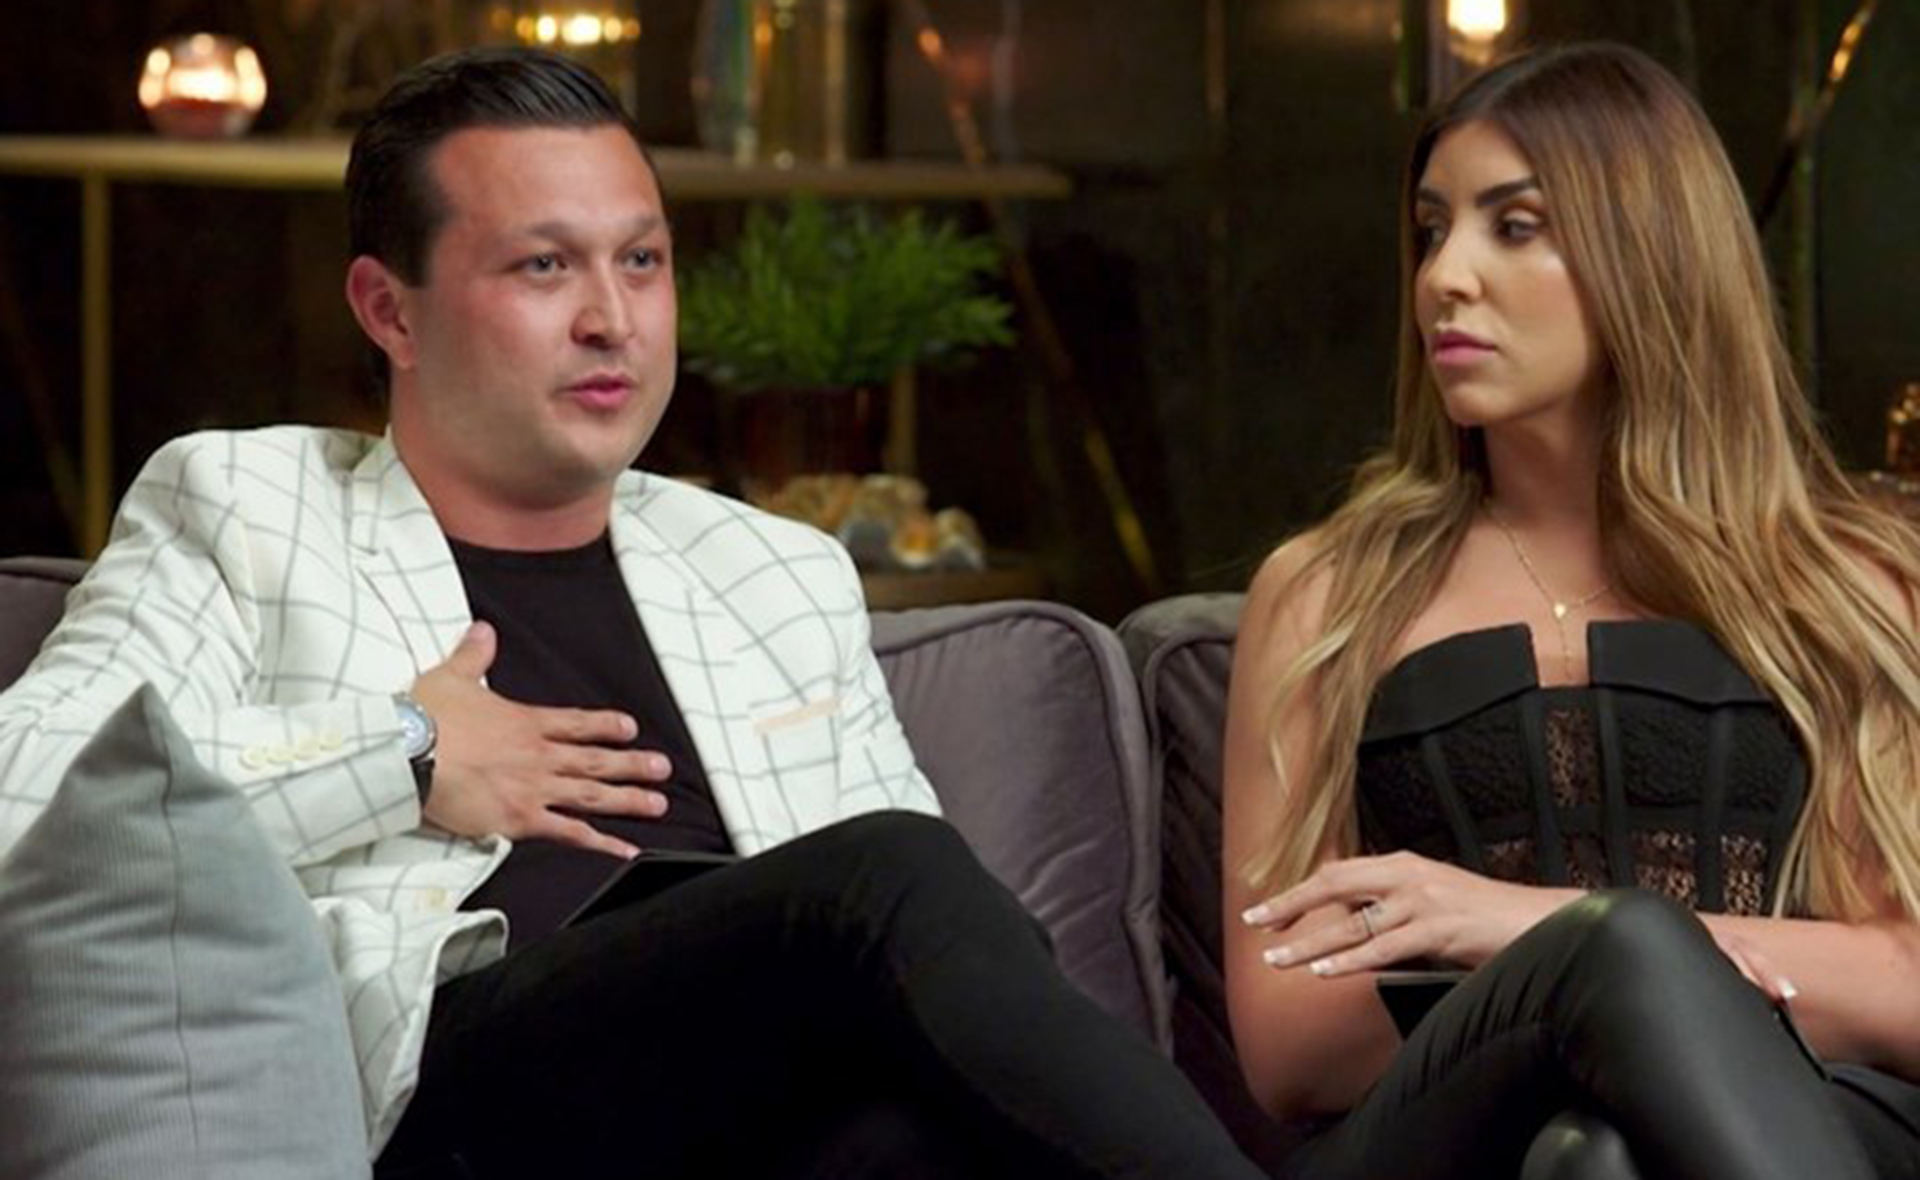 MAFS’ Carolina releases bombshell secret recordings claiming producers didn’t let her come clean to Dion over Daniel affair